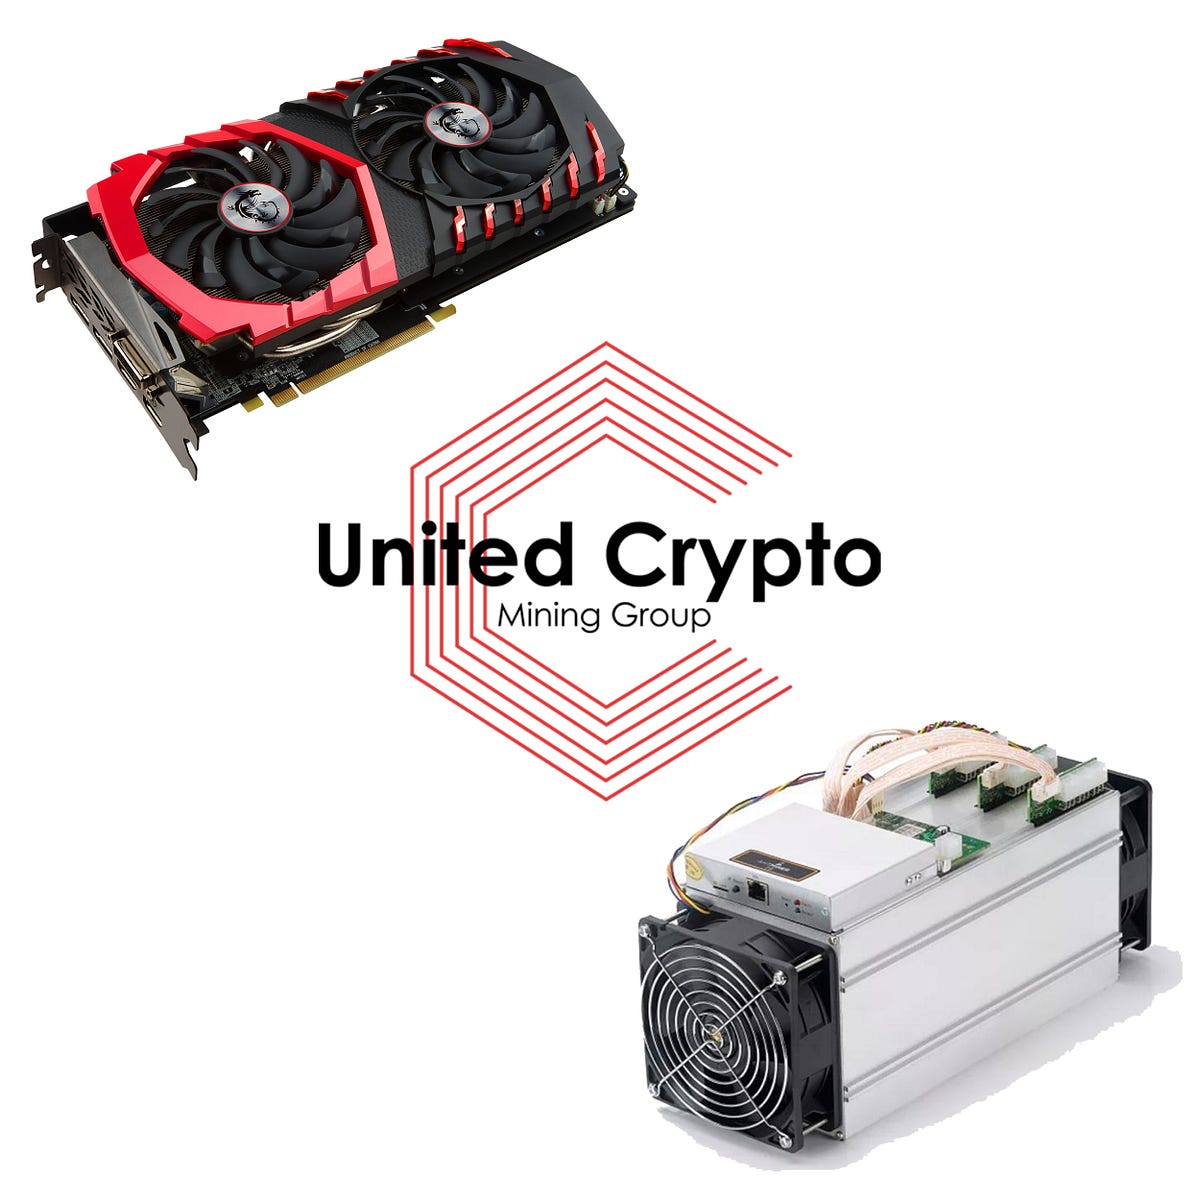 United Crypto Mining Group would like to announce an ...